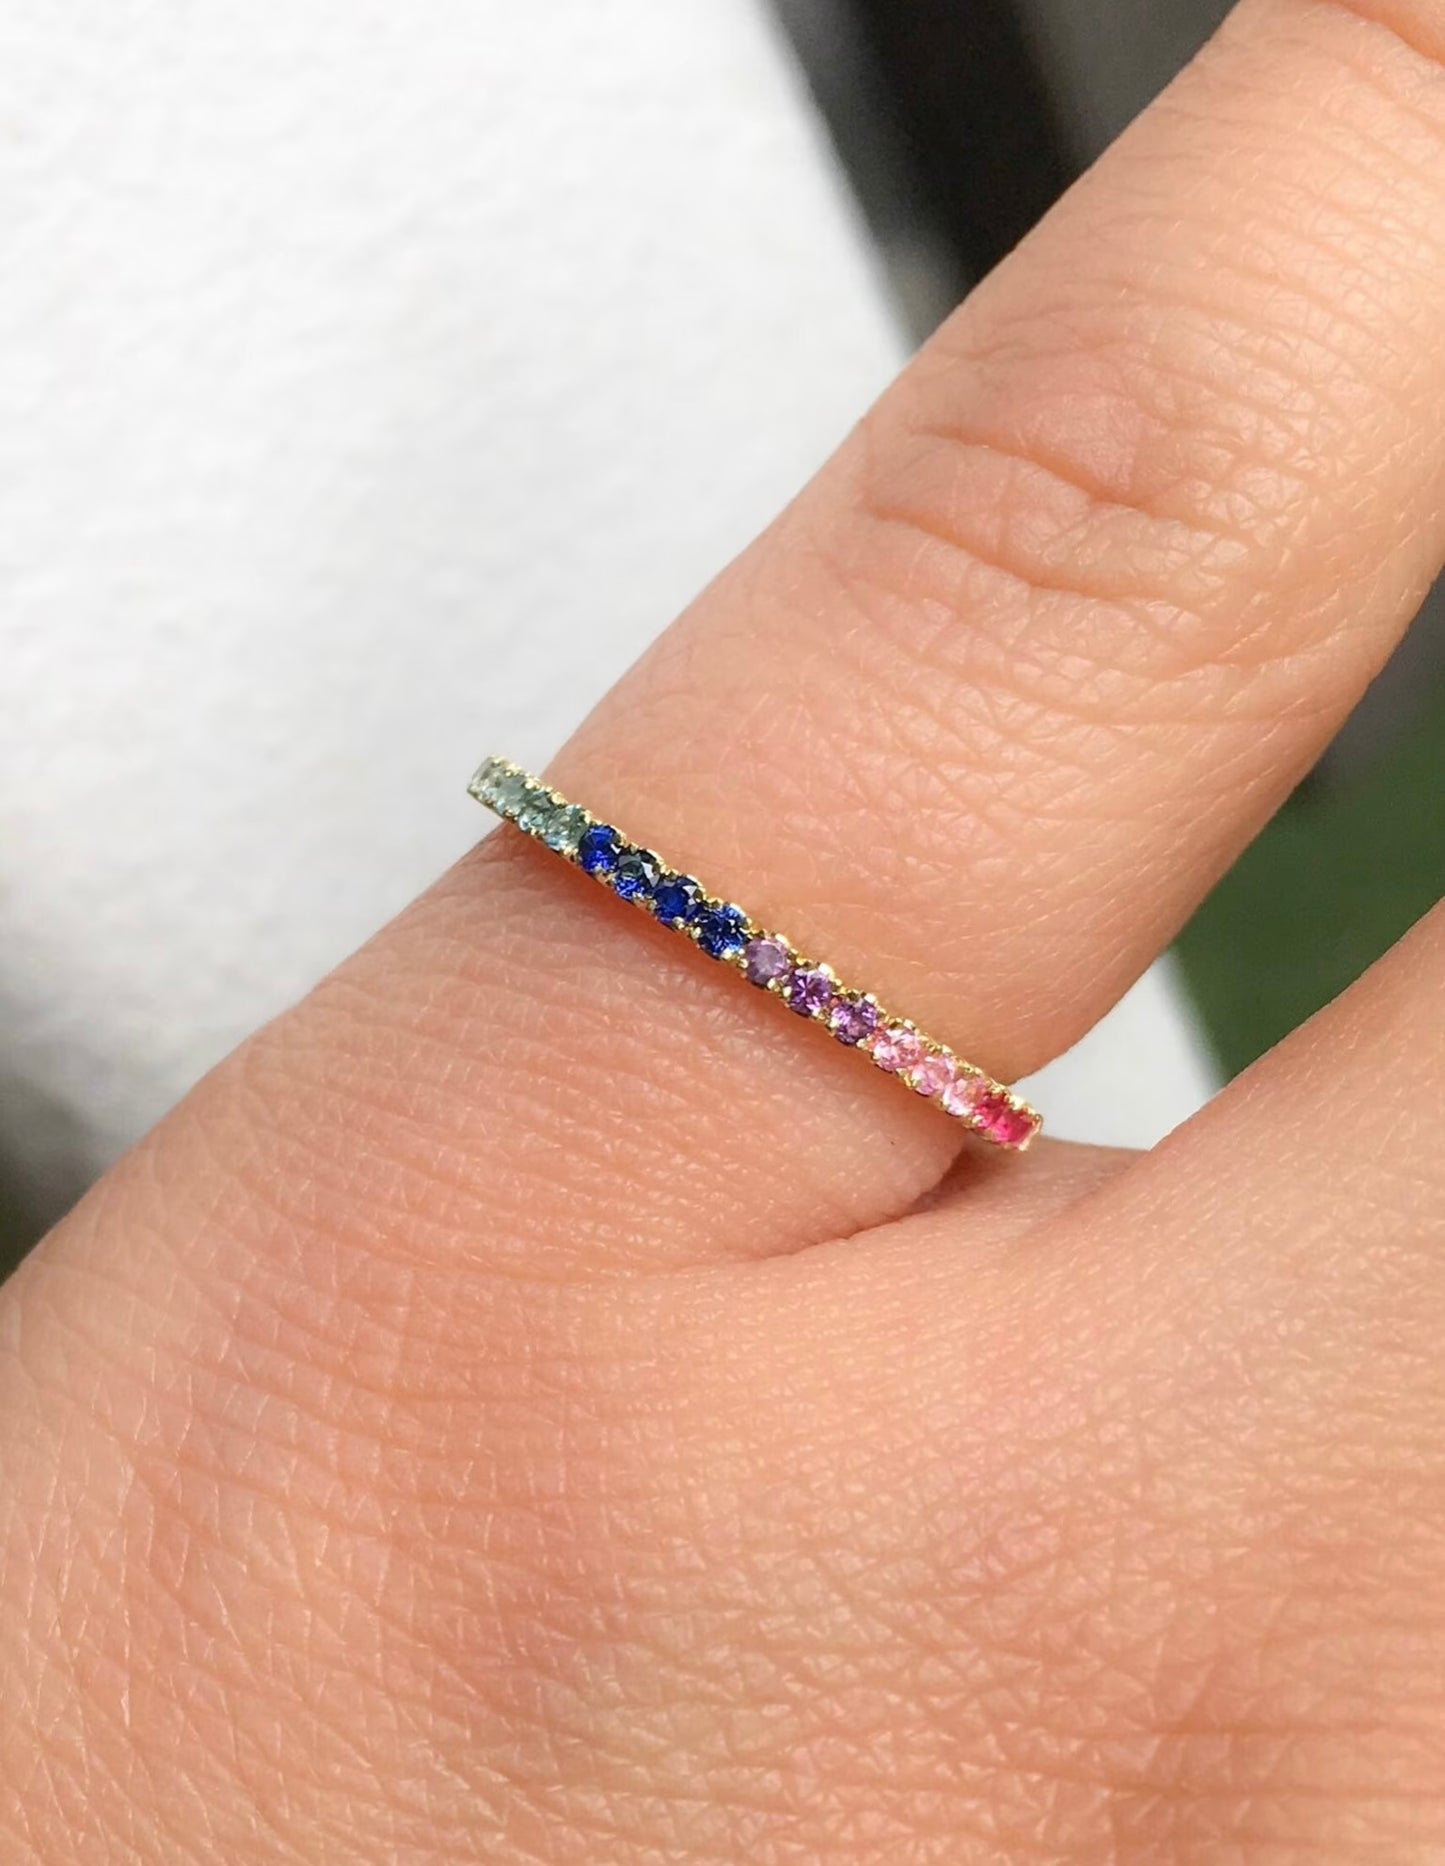 Rainbow Pave Band/ 1.5mm Multicolor Pave Half Eternity Ring/ Colorful Gemstone Stacking Ring/ Rainbow Wedding Band/ Anniversary Stack Ring